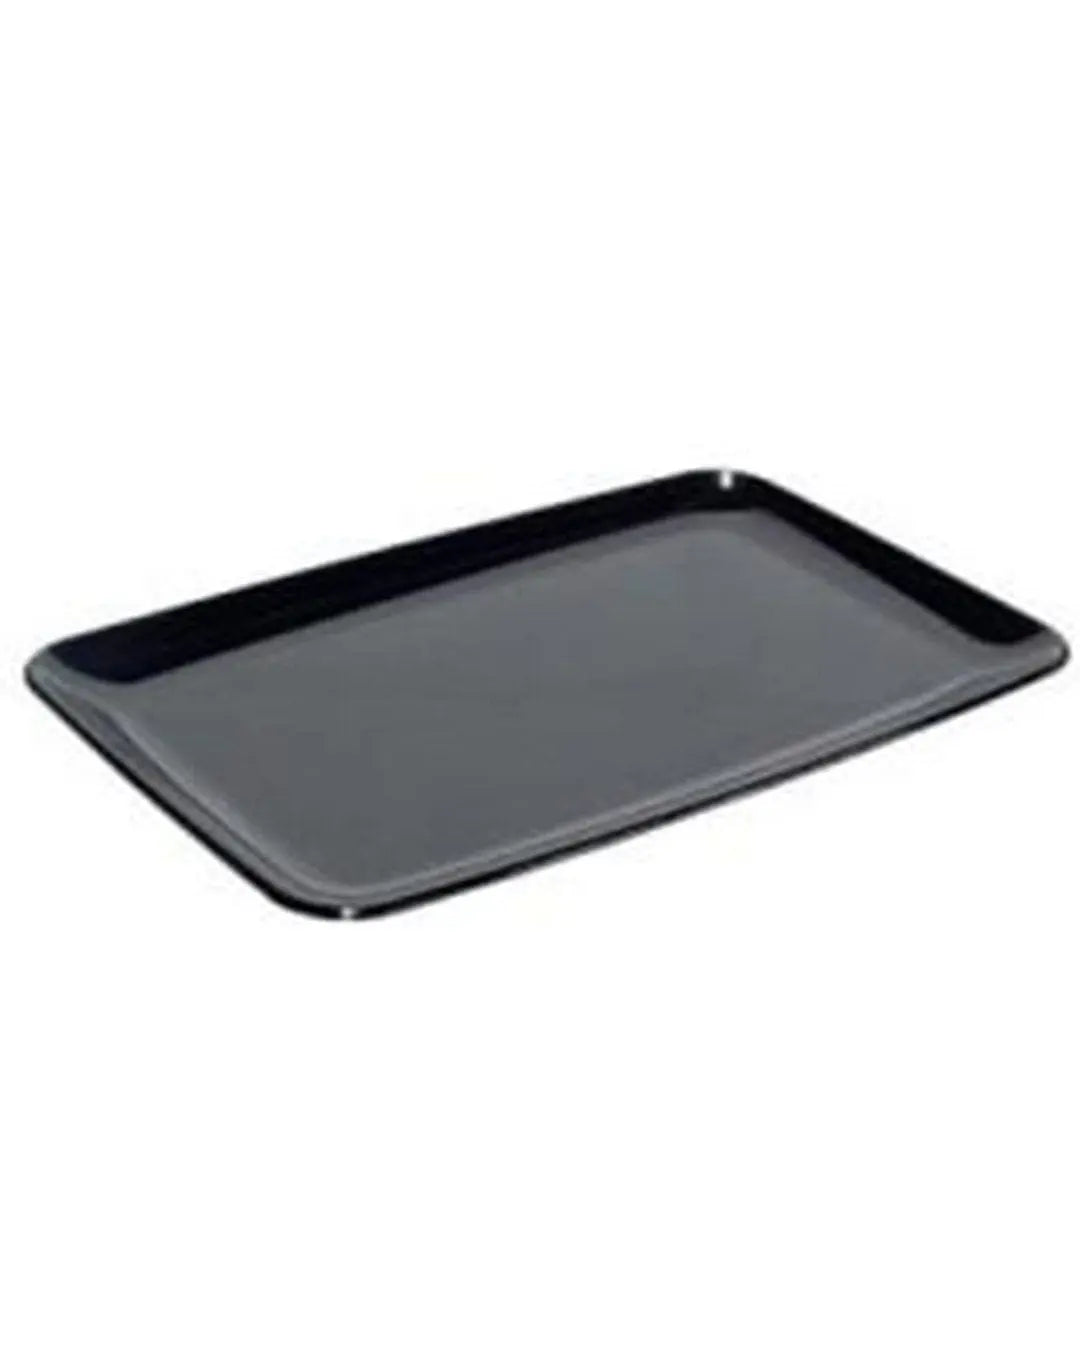 Rectangular Black Tray Plastic Pack Size 3 Partyware 5033298005728